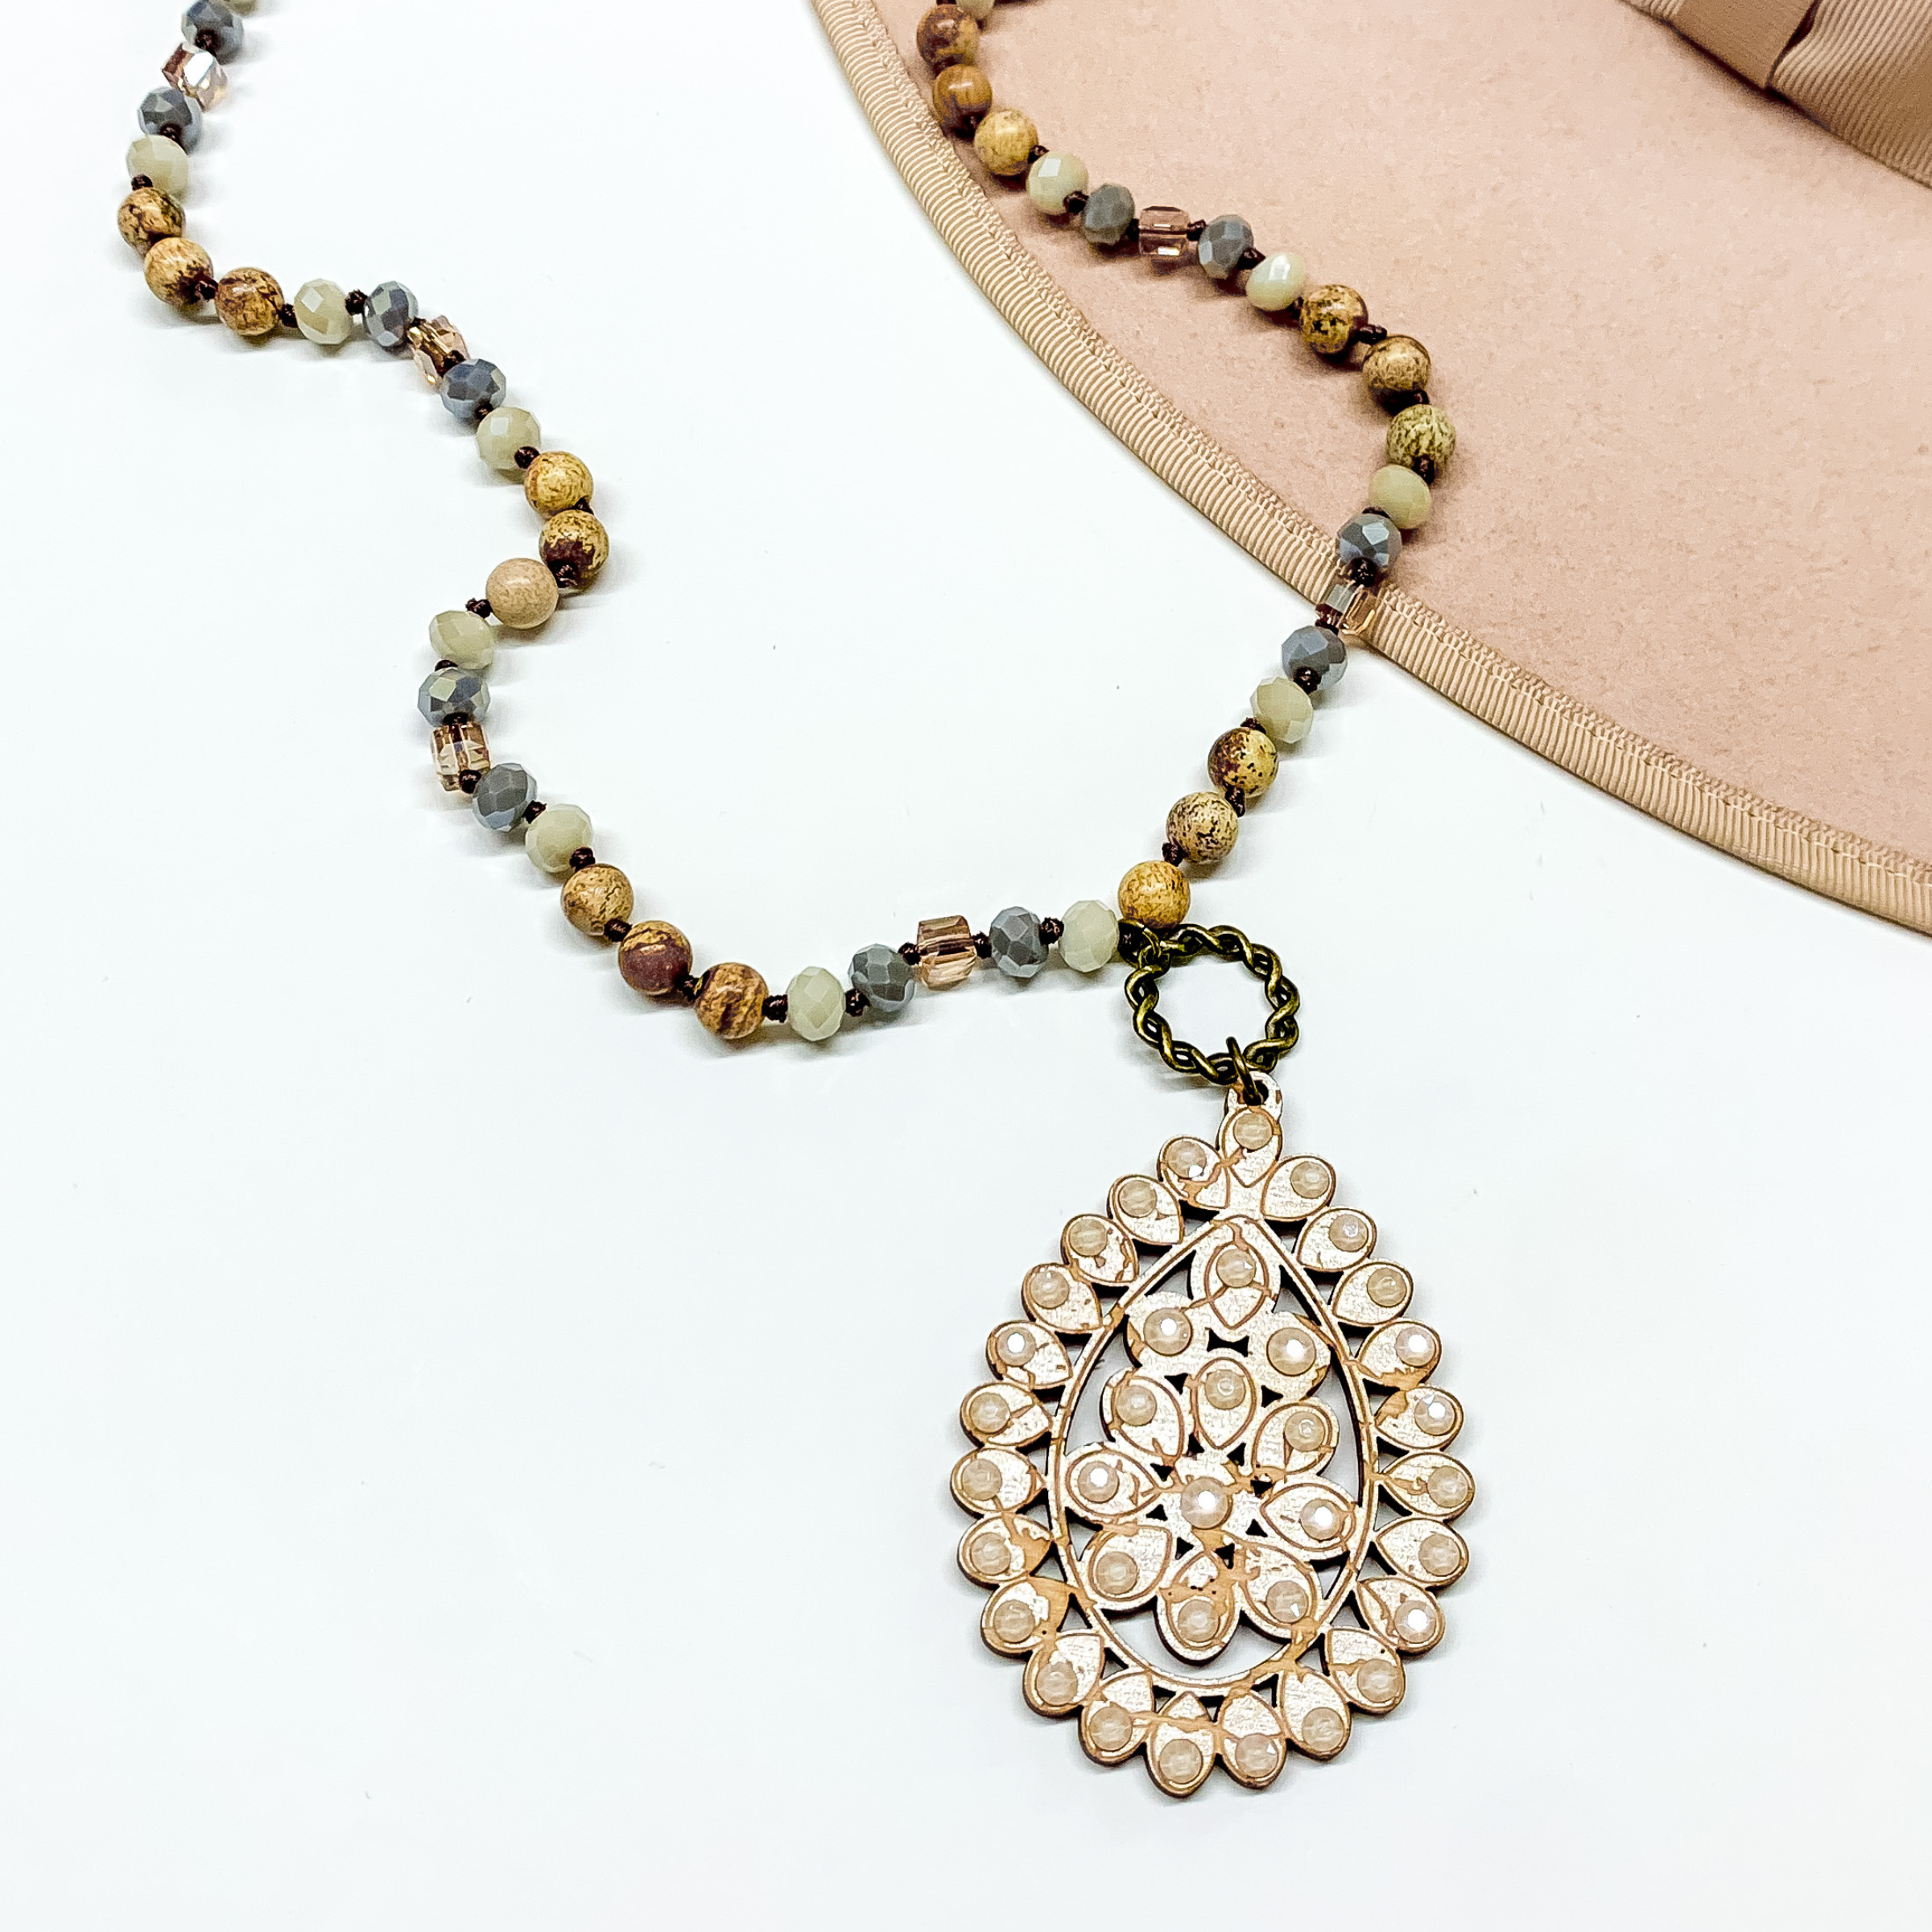 Brown mix beaded necklace with a tan teardrop pendant connected to the necklace by a bronze circle. The pendant has a candy ivory crystal outline. This necklace is pictured on a white background with a tan hat brim in the top right corner. 